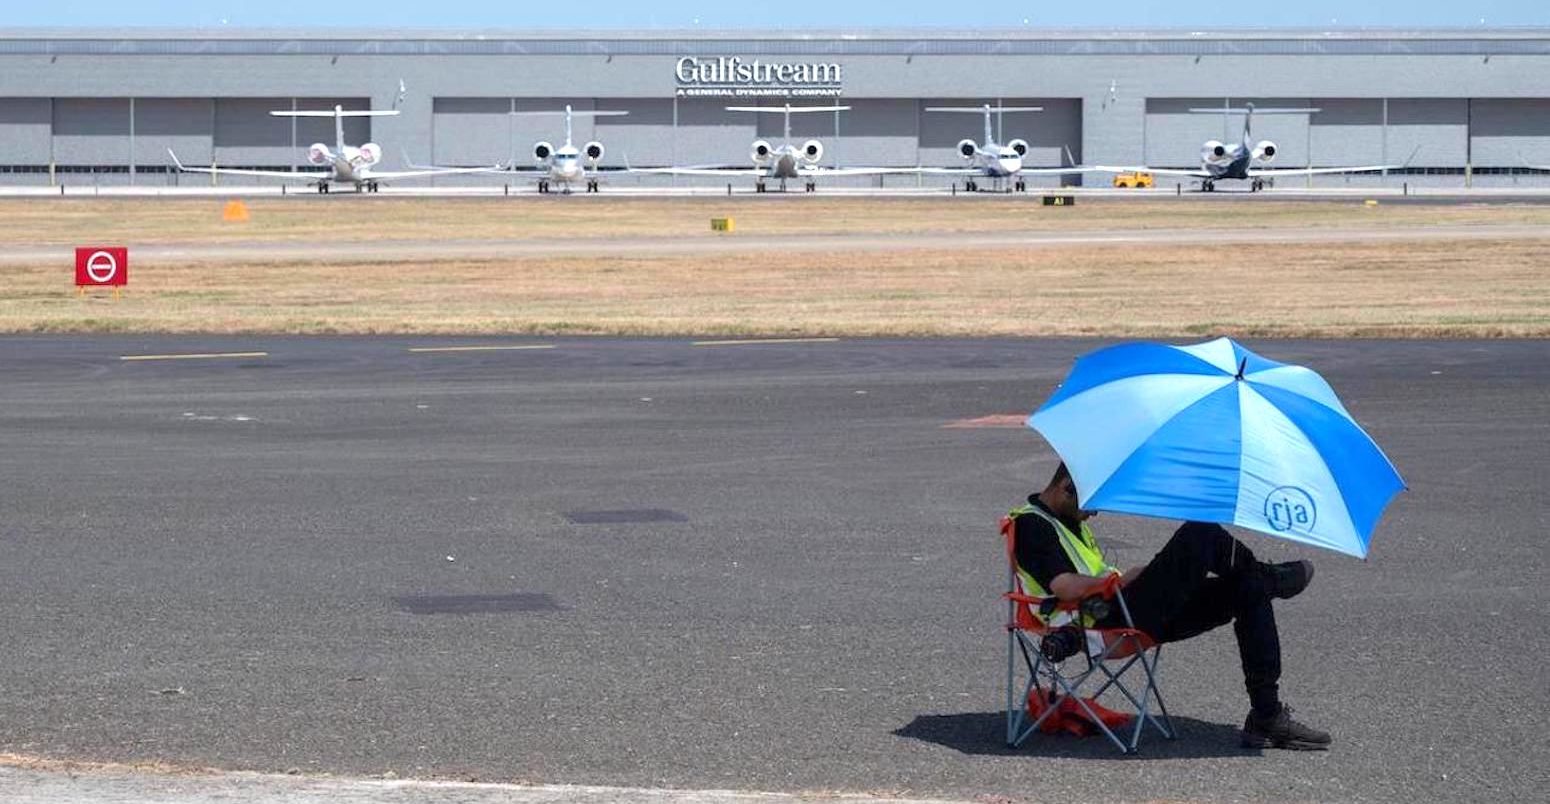 The Farnborough International Trade Airshow during the height of the UK heatwave, 2022.